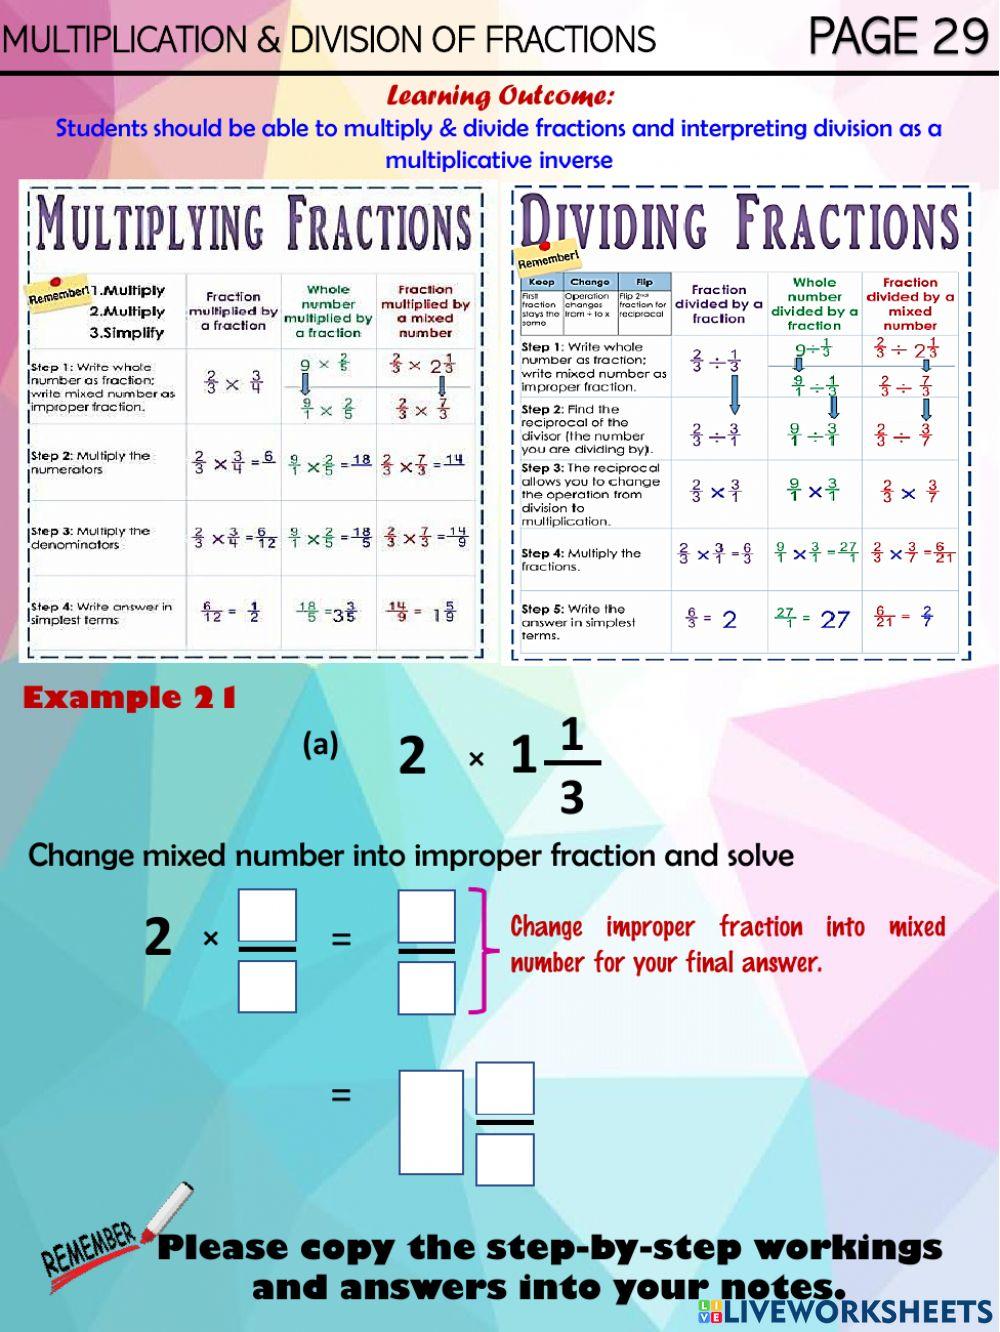 Multiplication and division of fraction